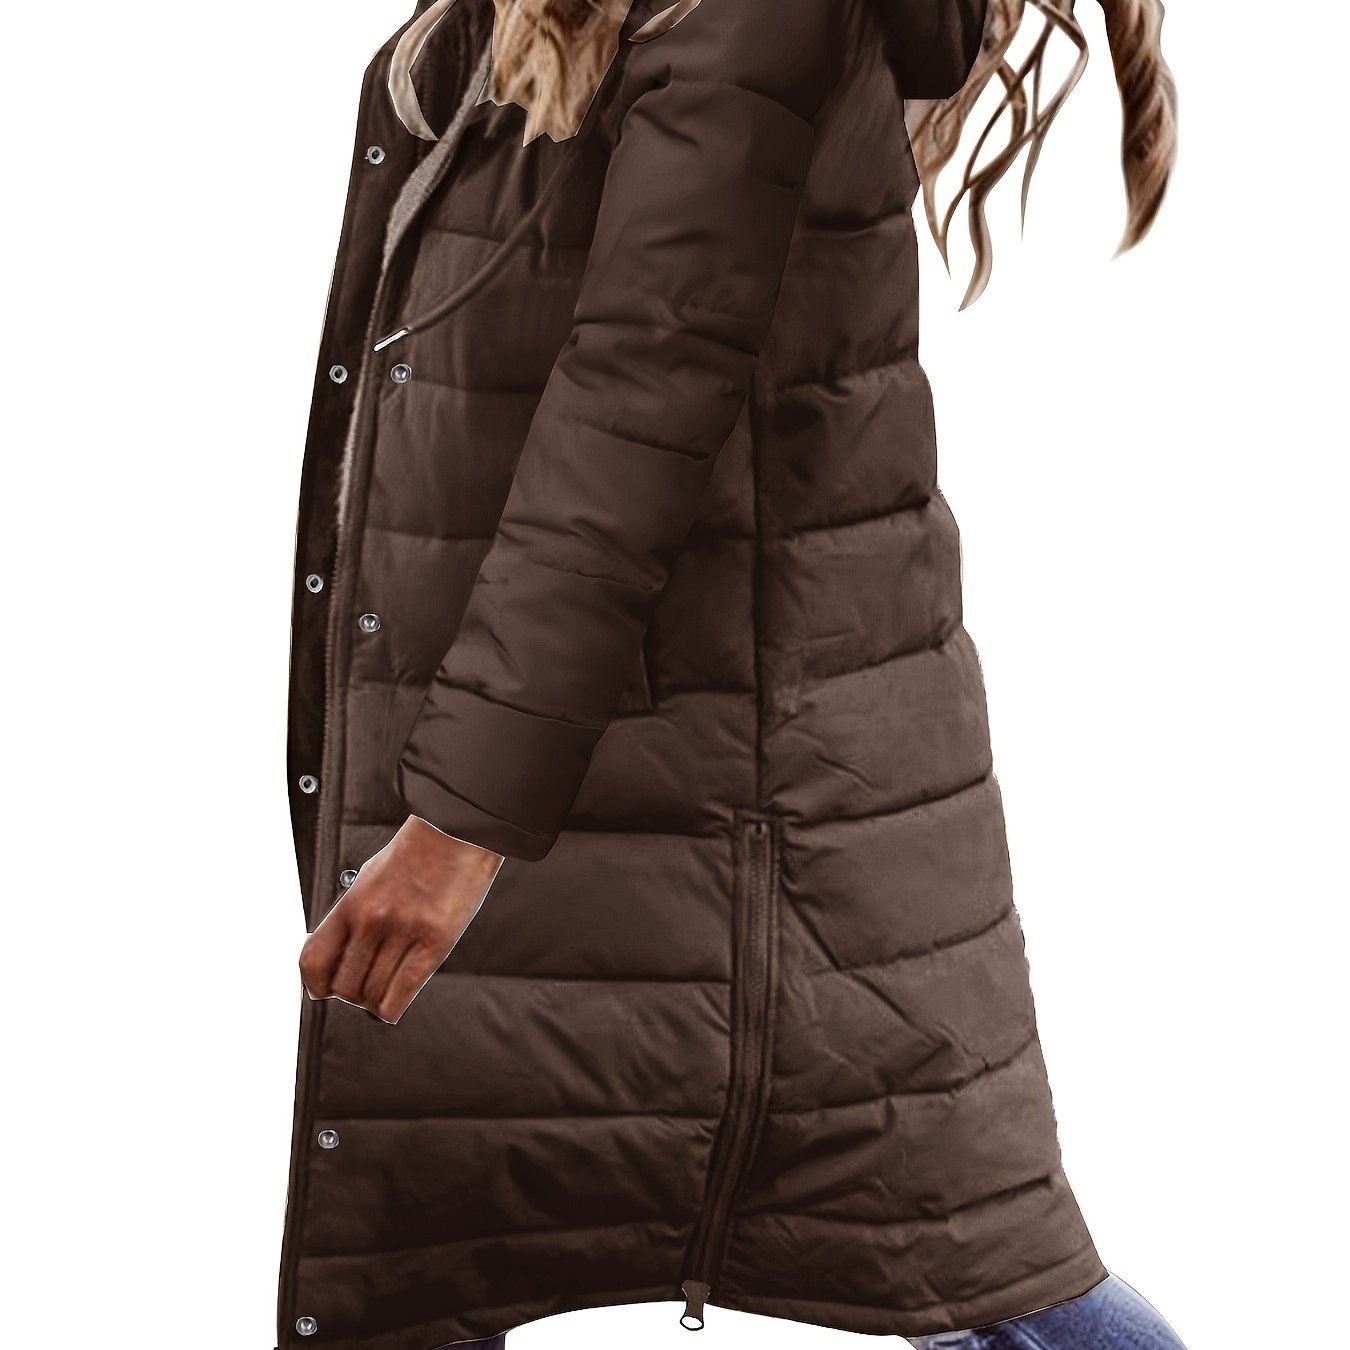 Button Hoodies & Puffy Coat Collection - Stay Cozy in Style! - Women's Jacket & Coat-CasualFlowshop 